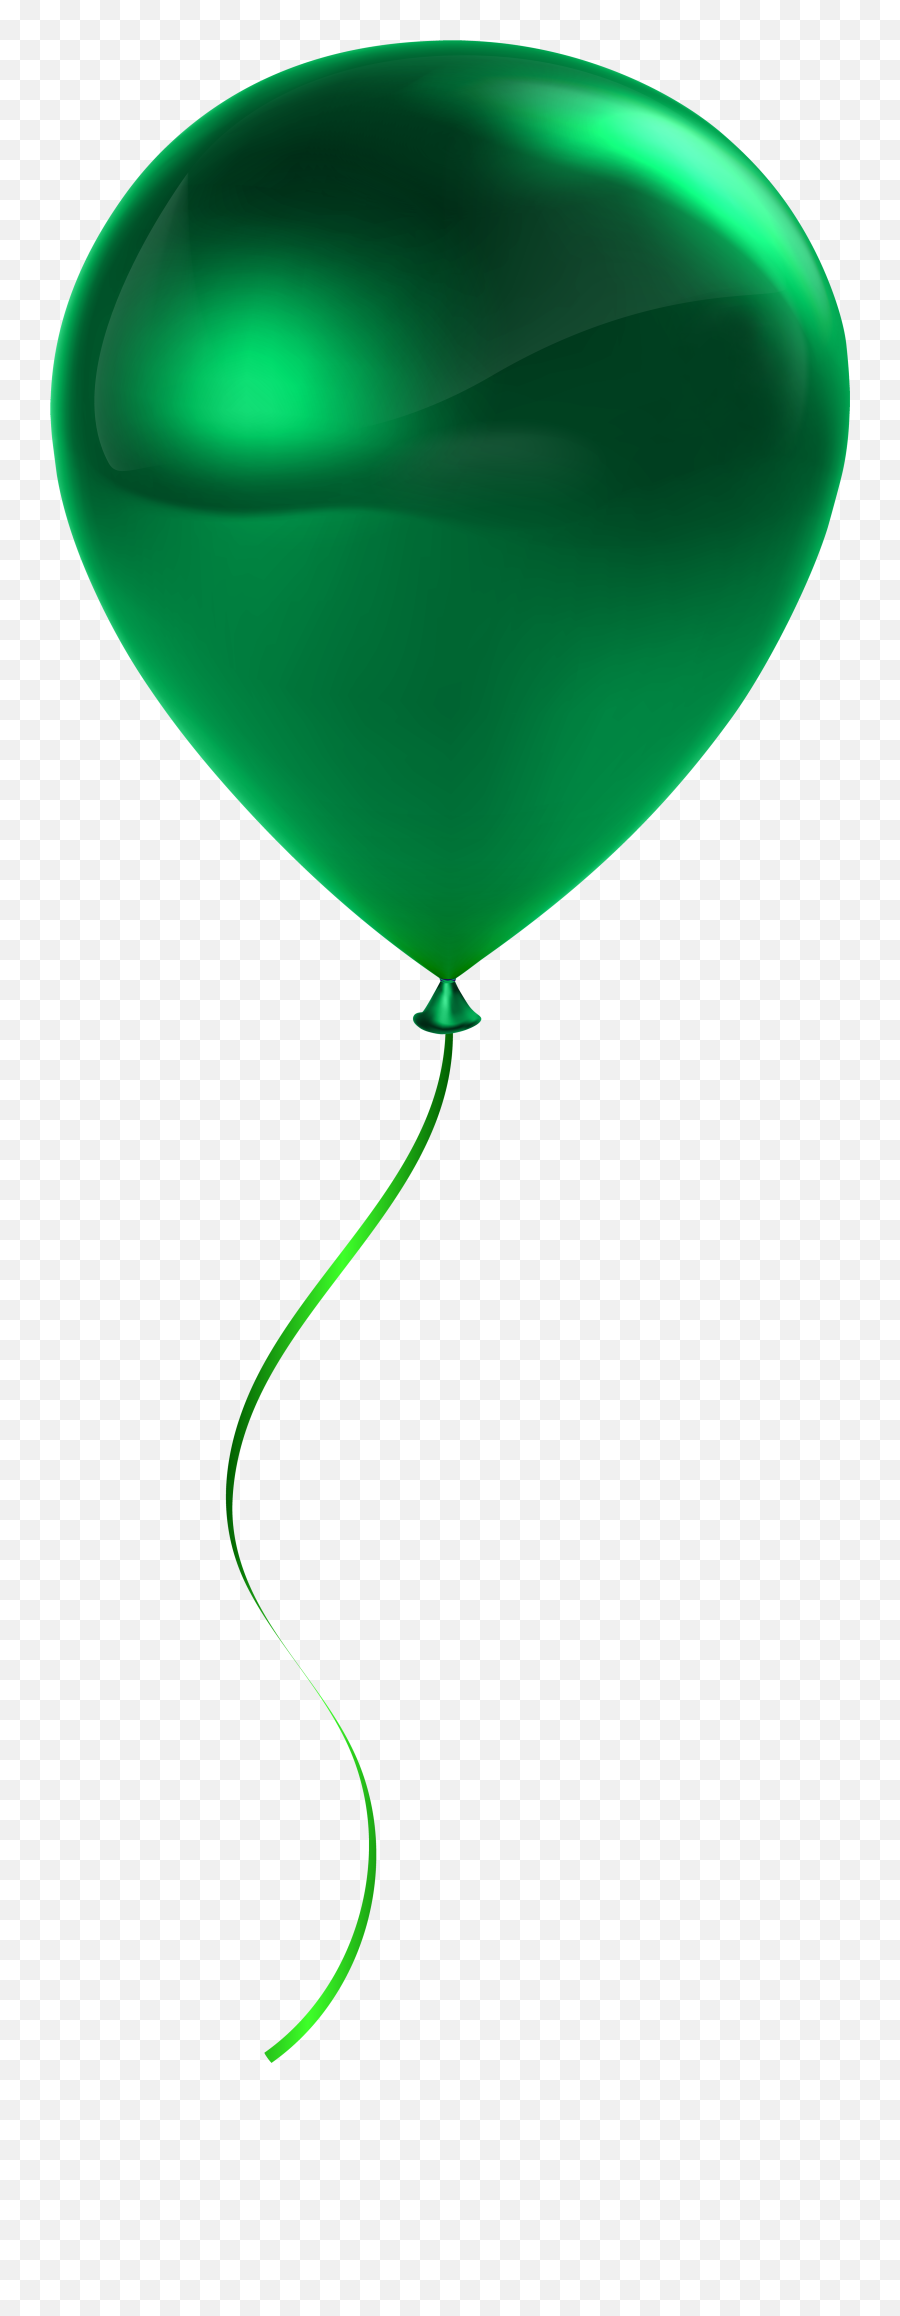 Download Green Balloon Clipart Collection Png Free - Green Balloon Emoji,Balloon Emoji Transparent